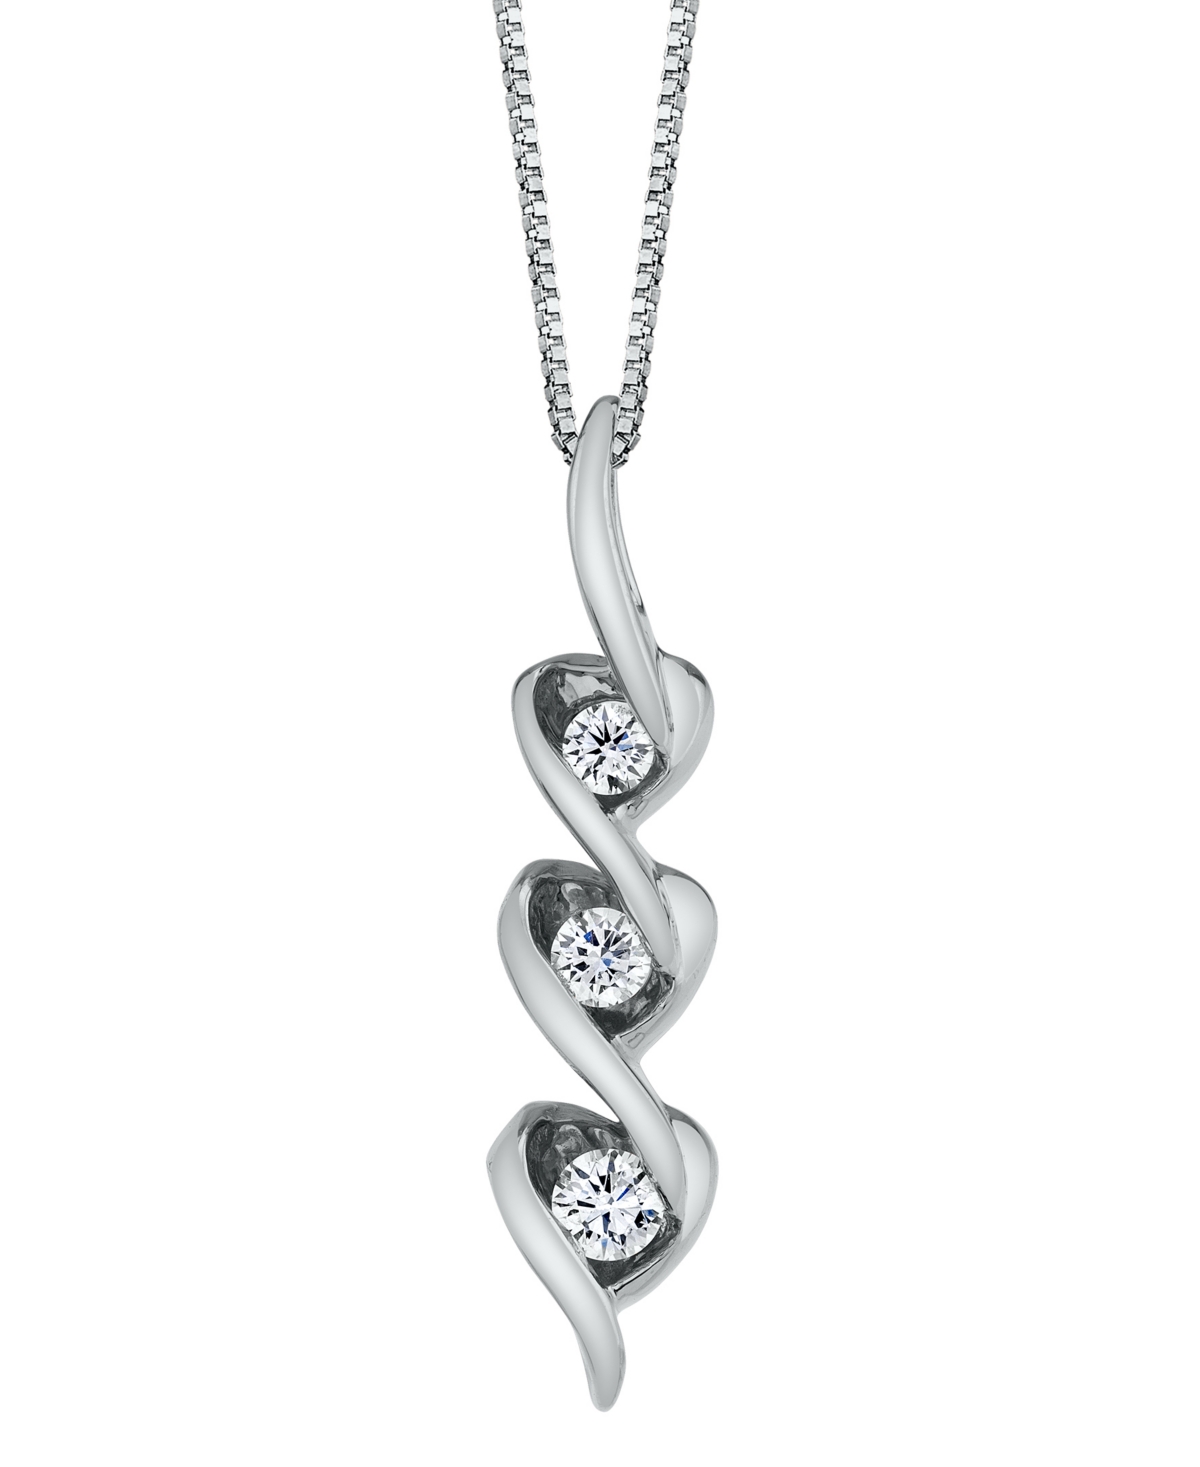 Diamond (1/8 ct. t.w.) Heart Pendant in 14k White, Yellow or Rose Gold - ROSE GOLD